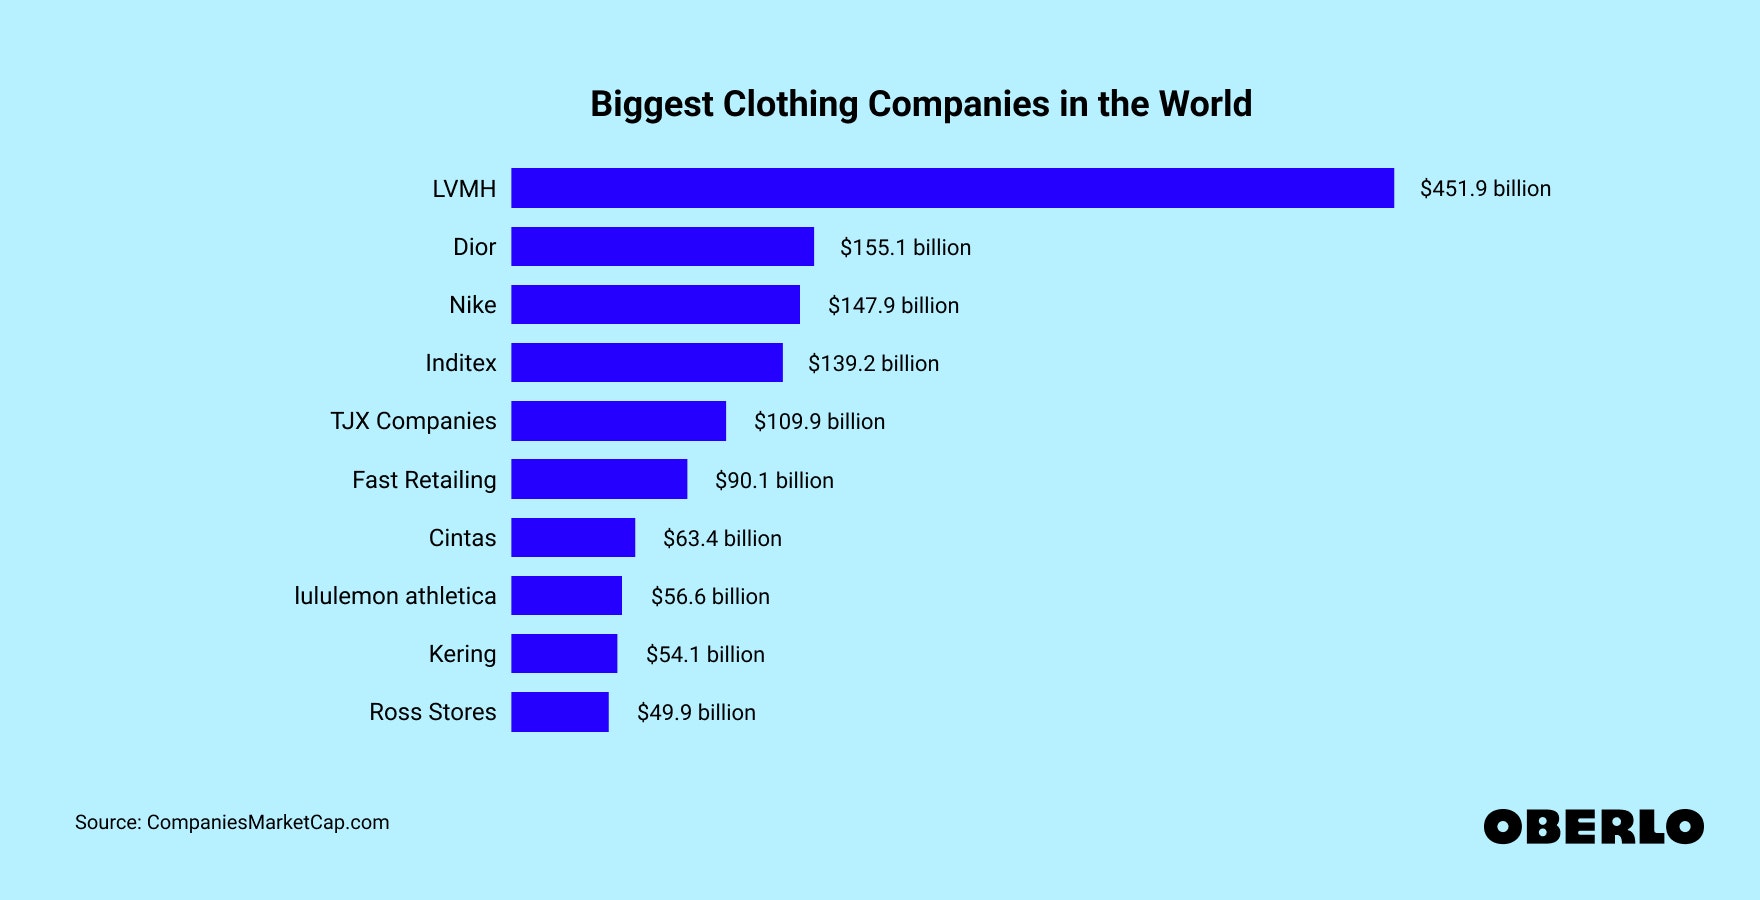 https://www.oberlo.com/media/1709810516-biggest-clothing-companies-in-the-world.png?fit=max&fm=jpg&w=1800